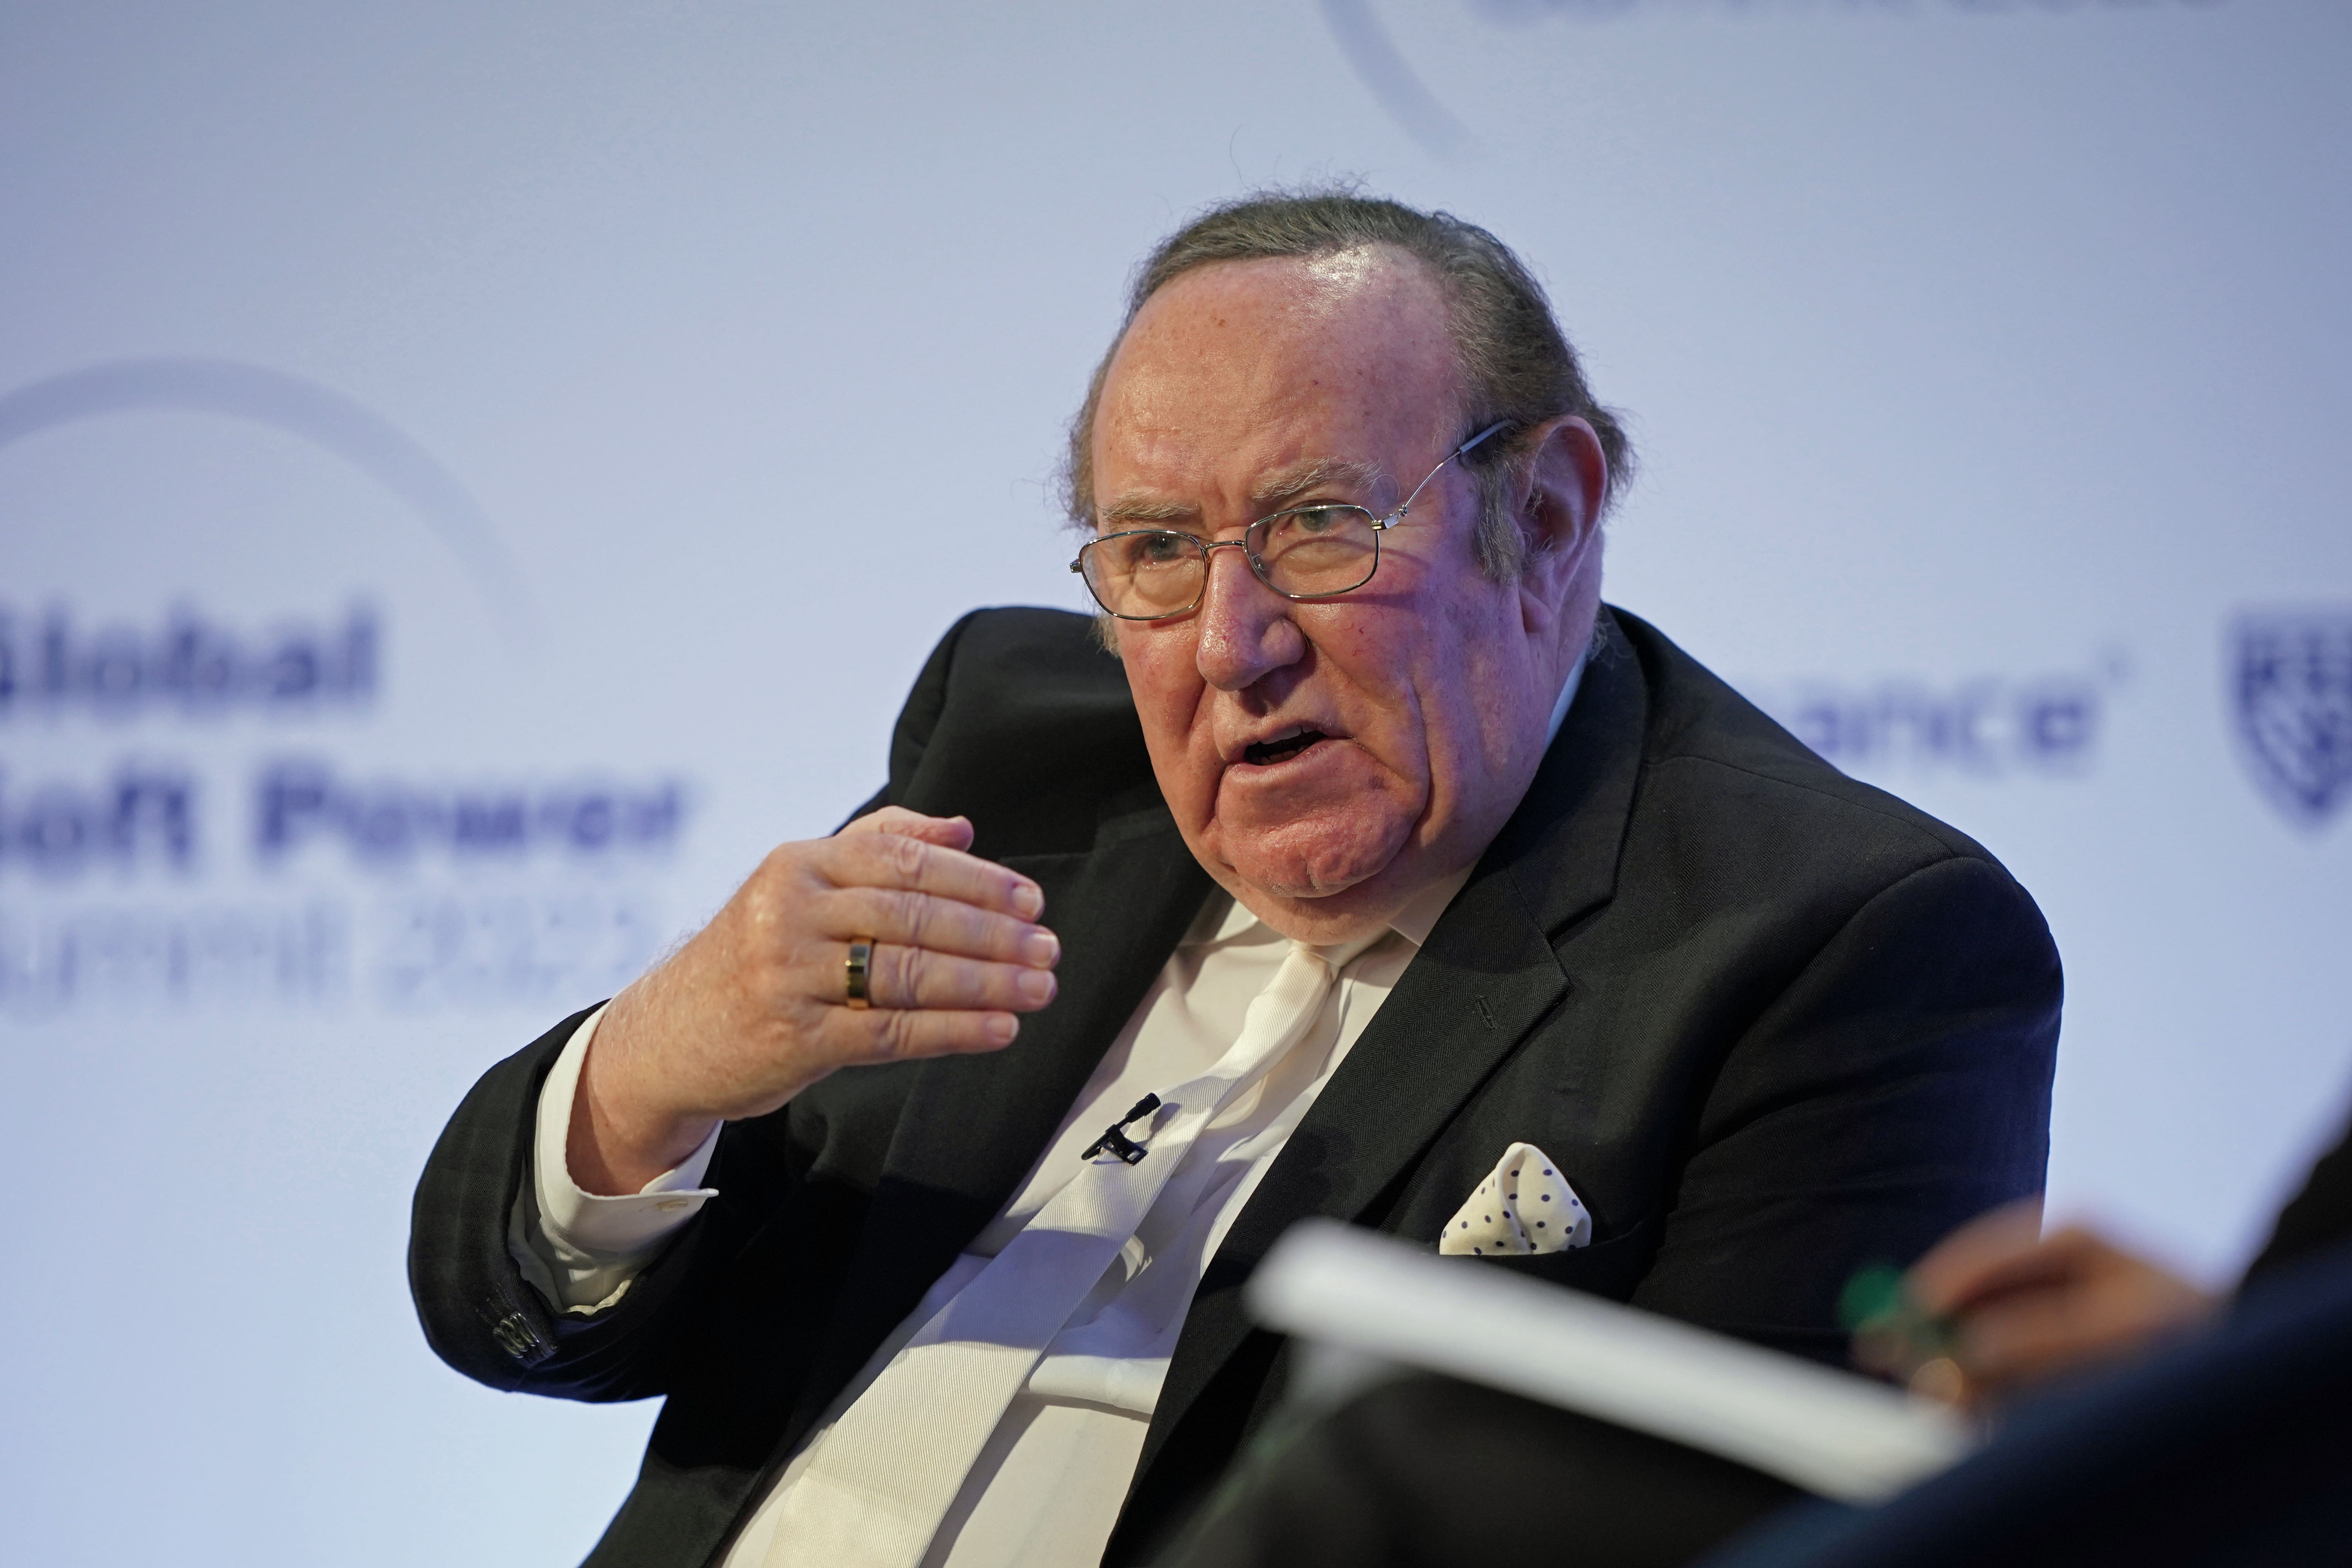 Andrew Neil edited London’s Sunday Times for much of the Reagan and Thatcher eras